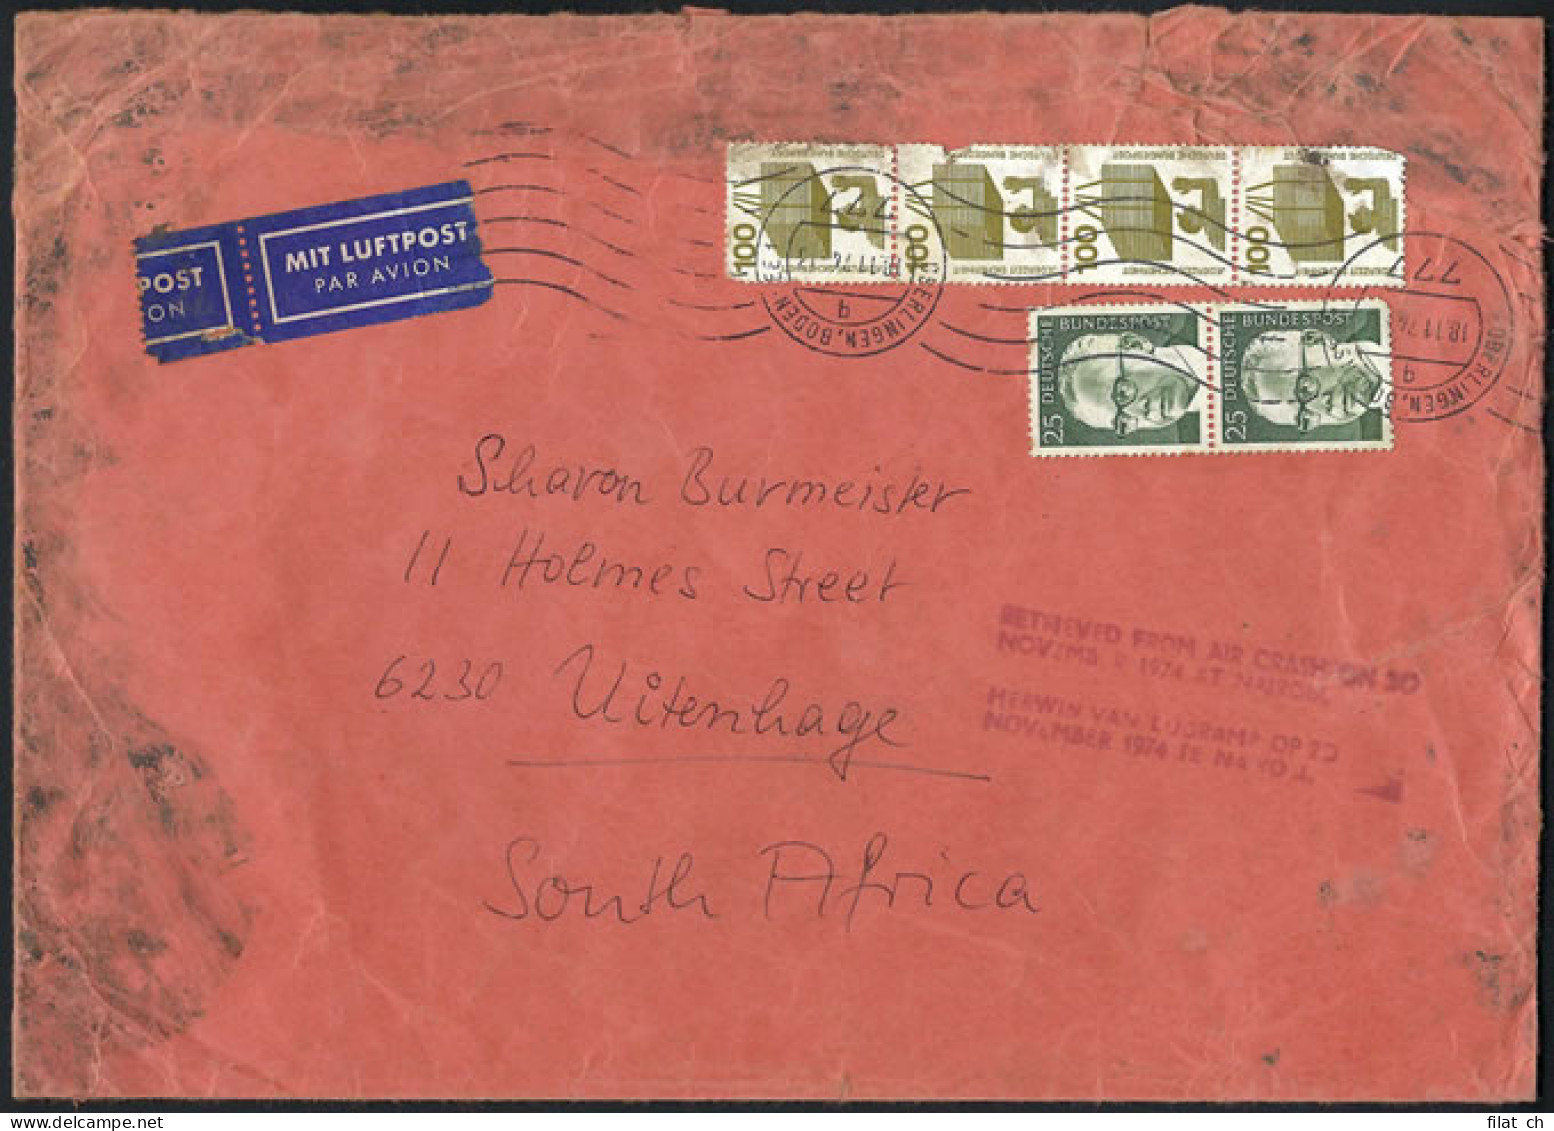 South Africa 1974 Nairobi Lufthansa Crash Cover Ex Germany - Unclassified